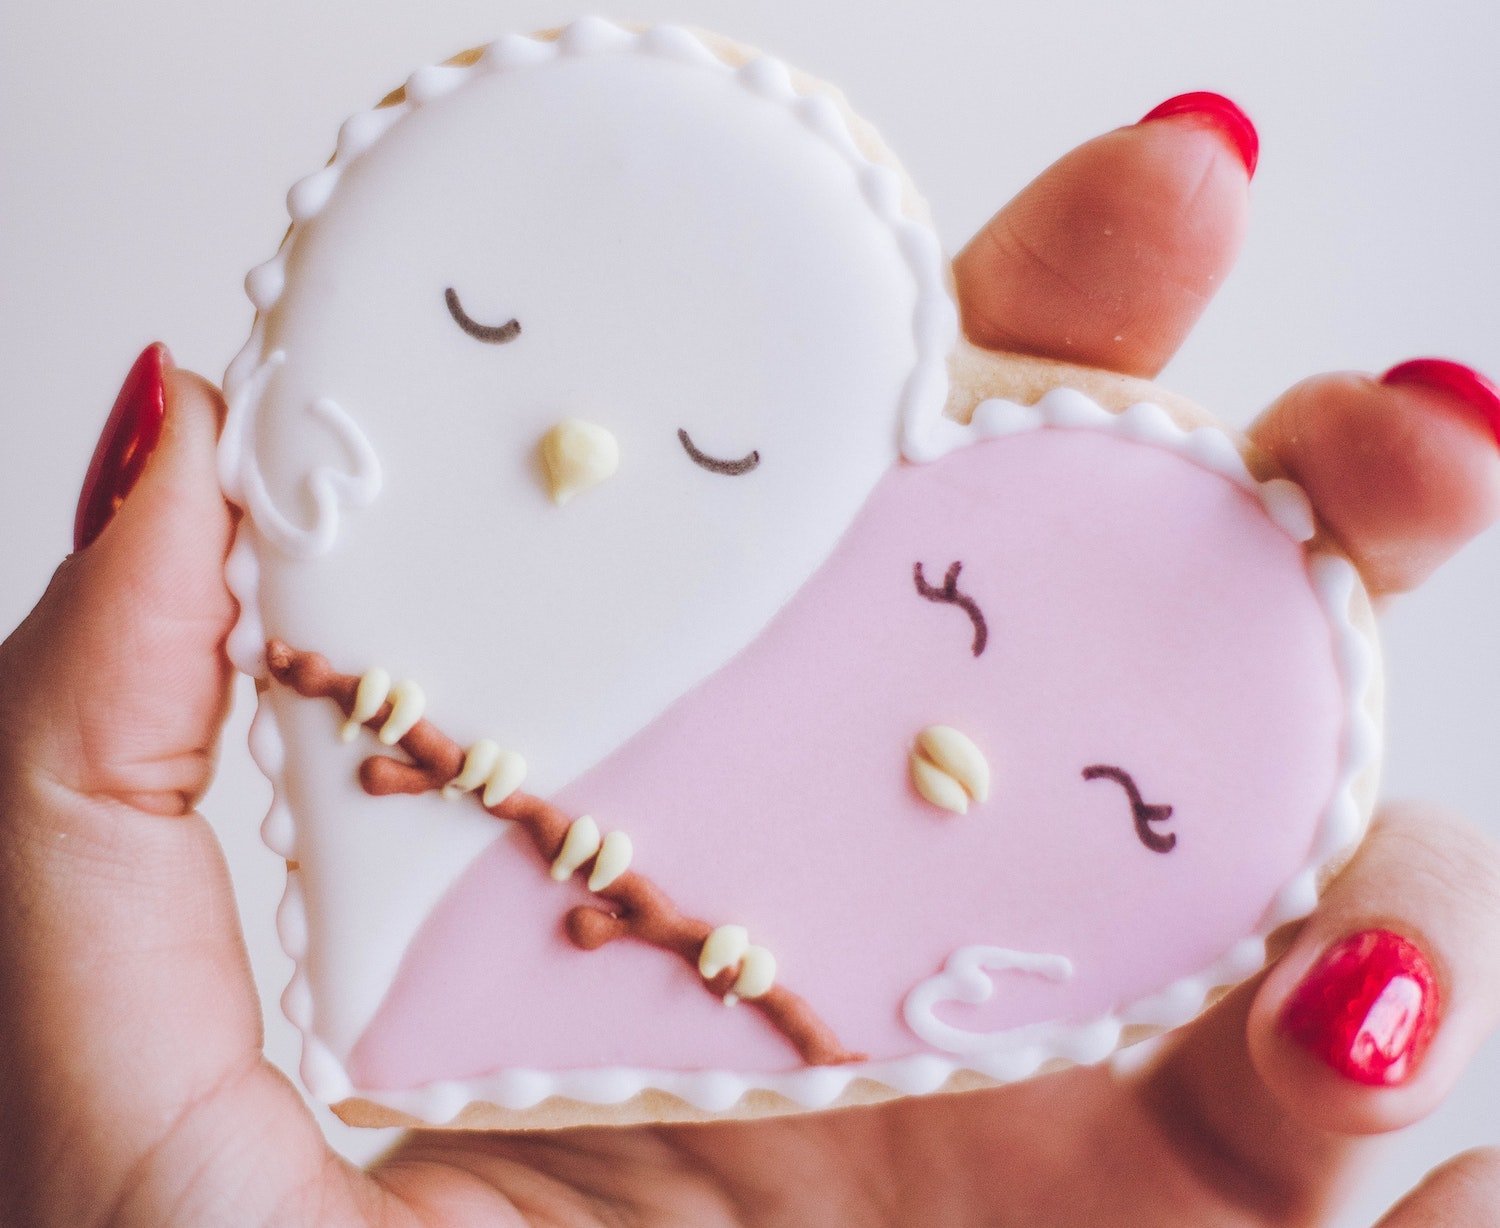 12 Sweet Treats to Make For Your Sweetie this Valentine's Day